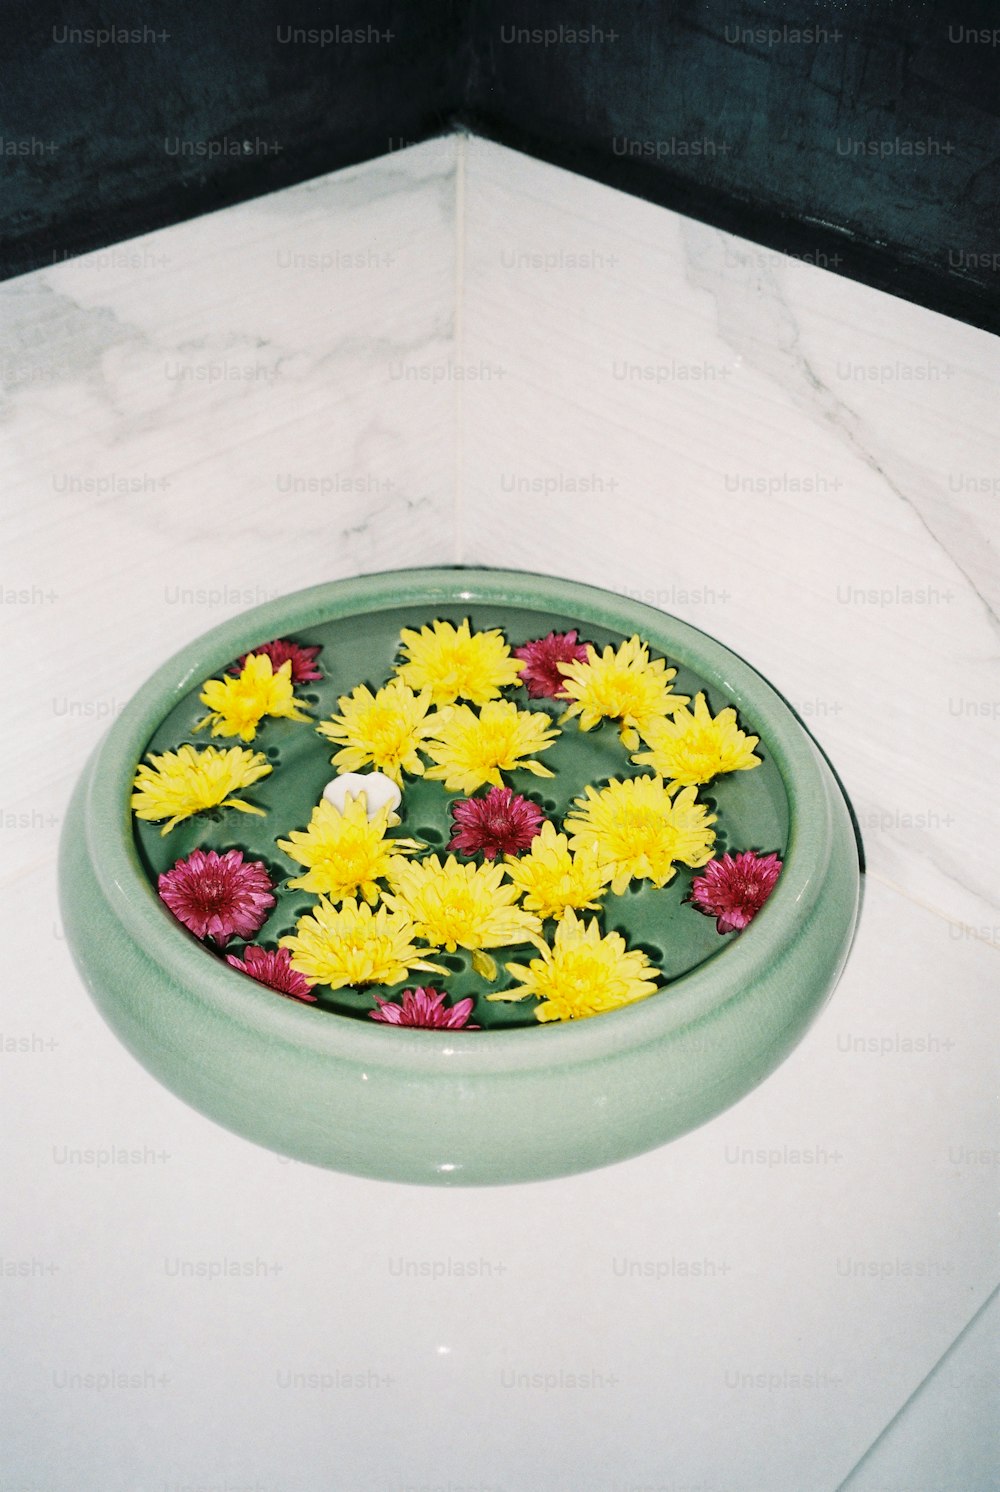 a green bowl filled with yellow and red flowers